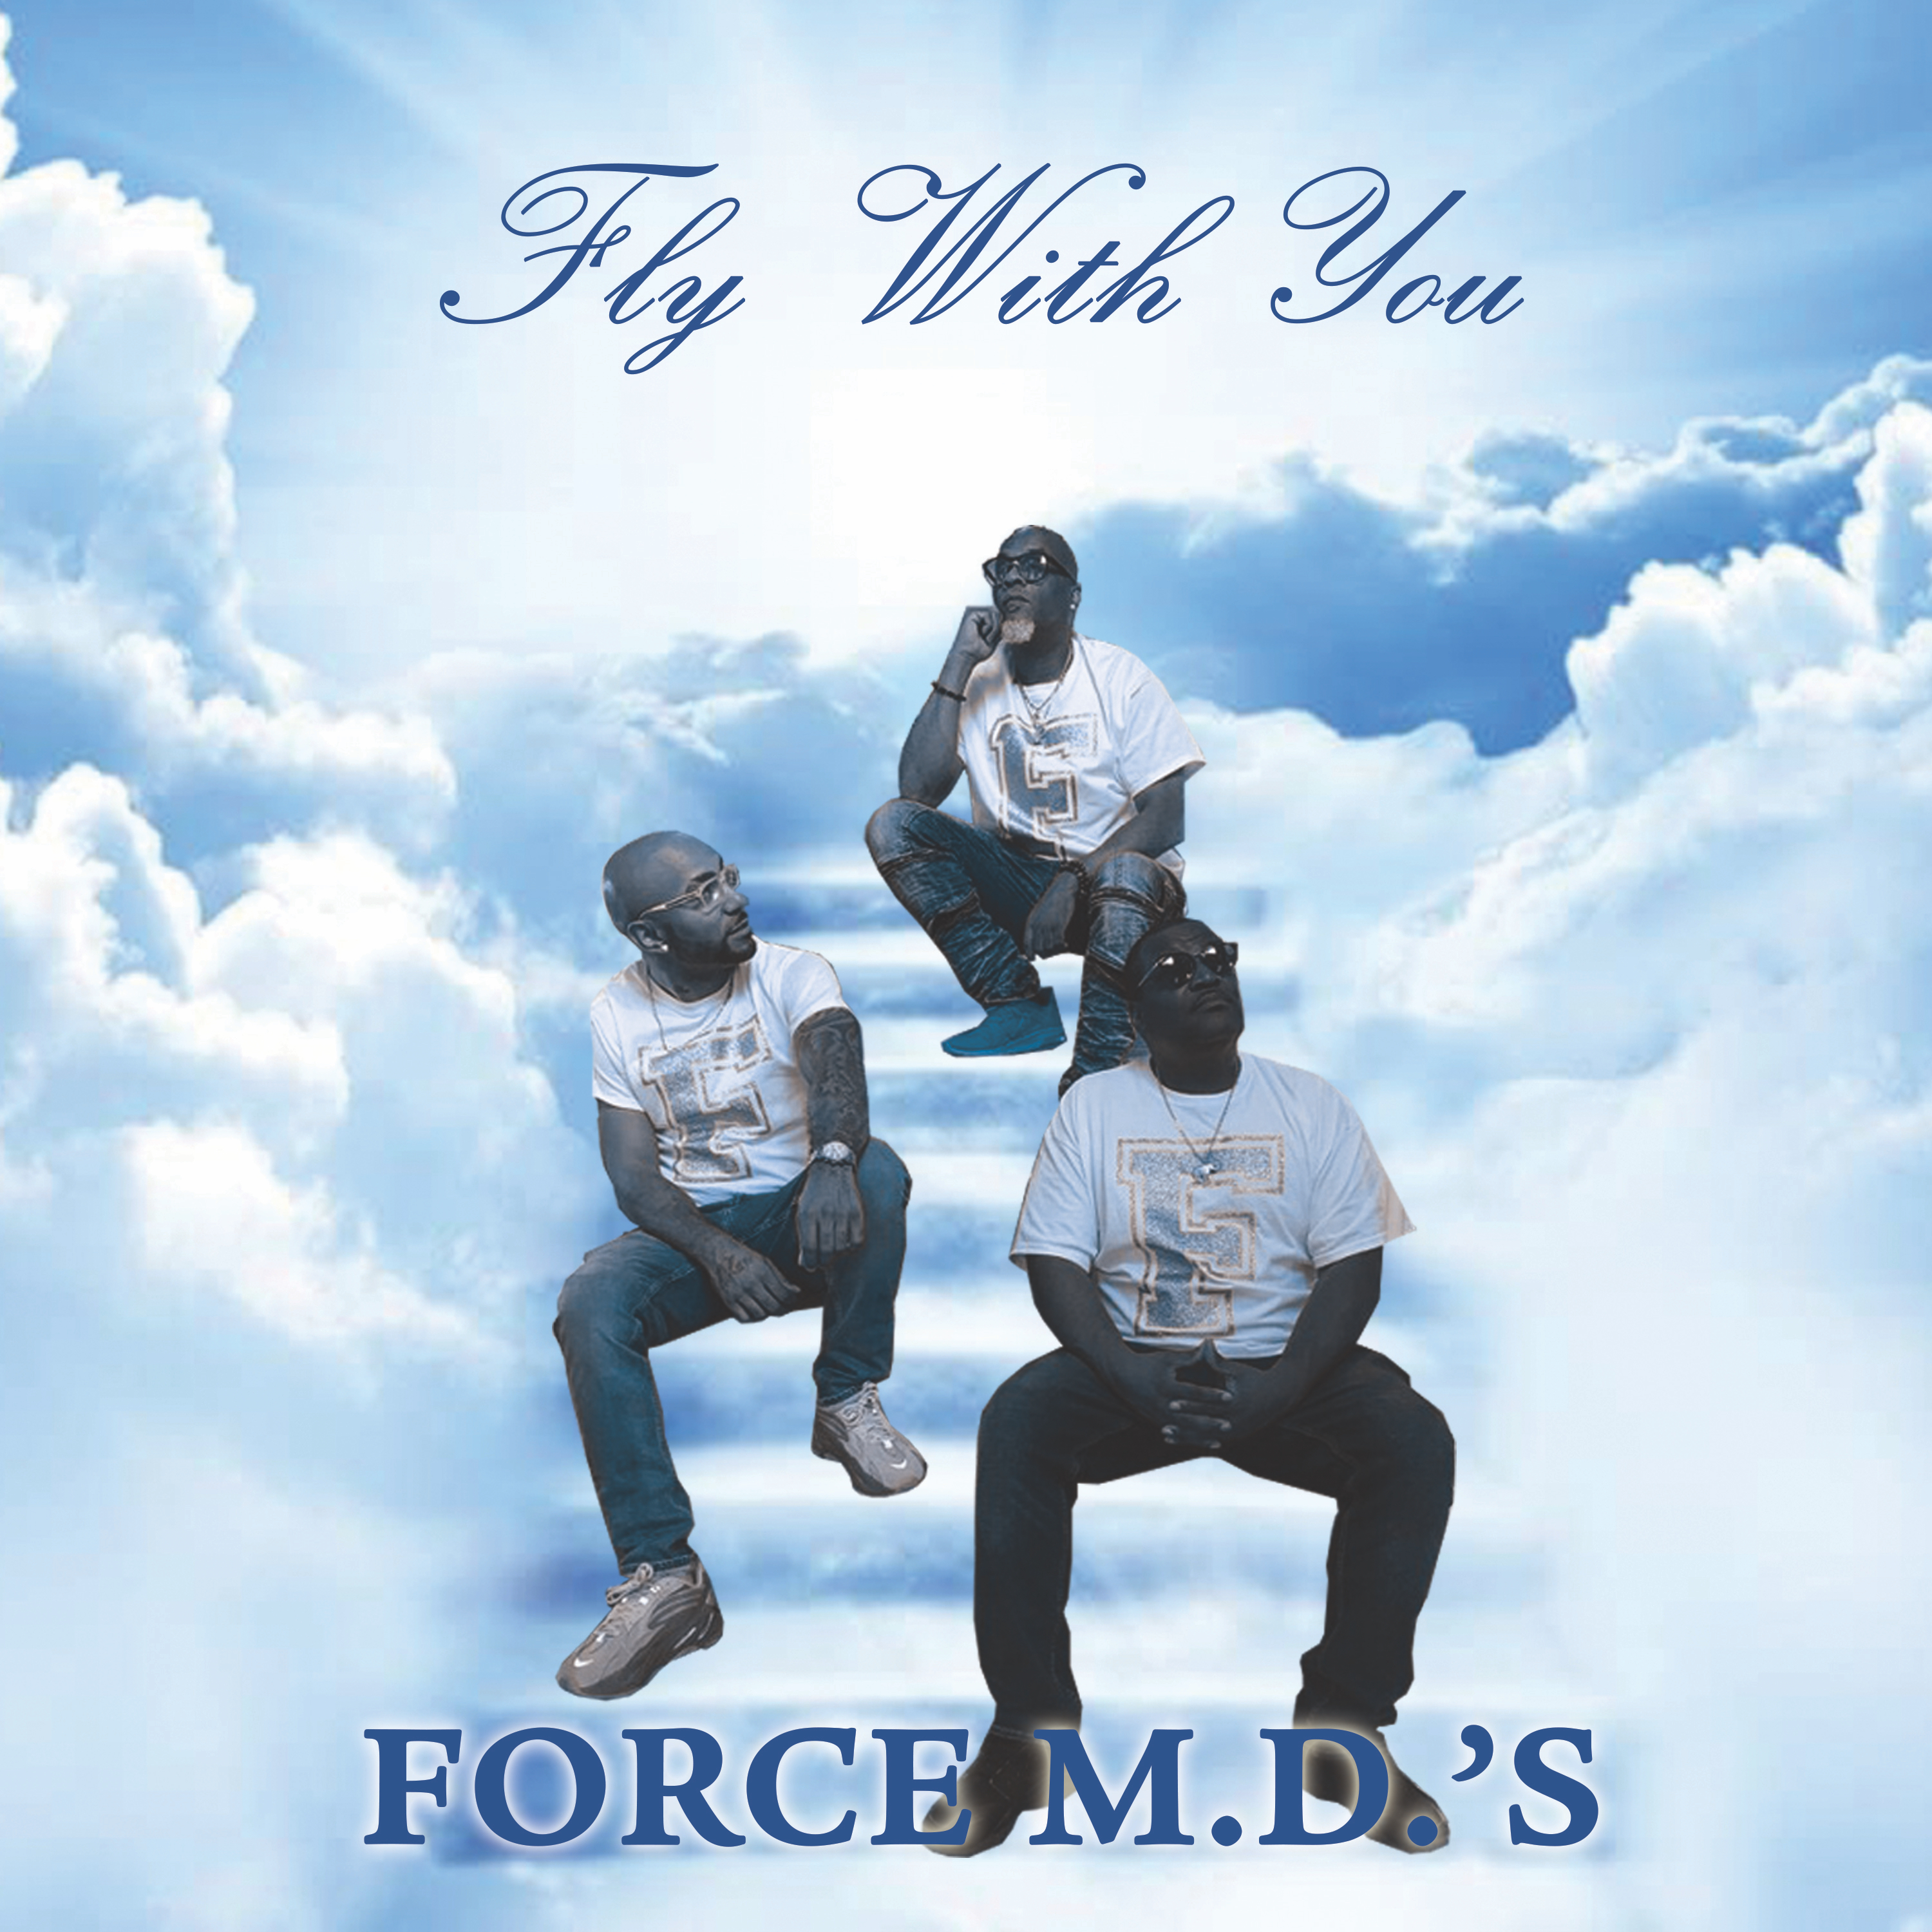 Fly with You by Force M.D.'s